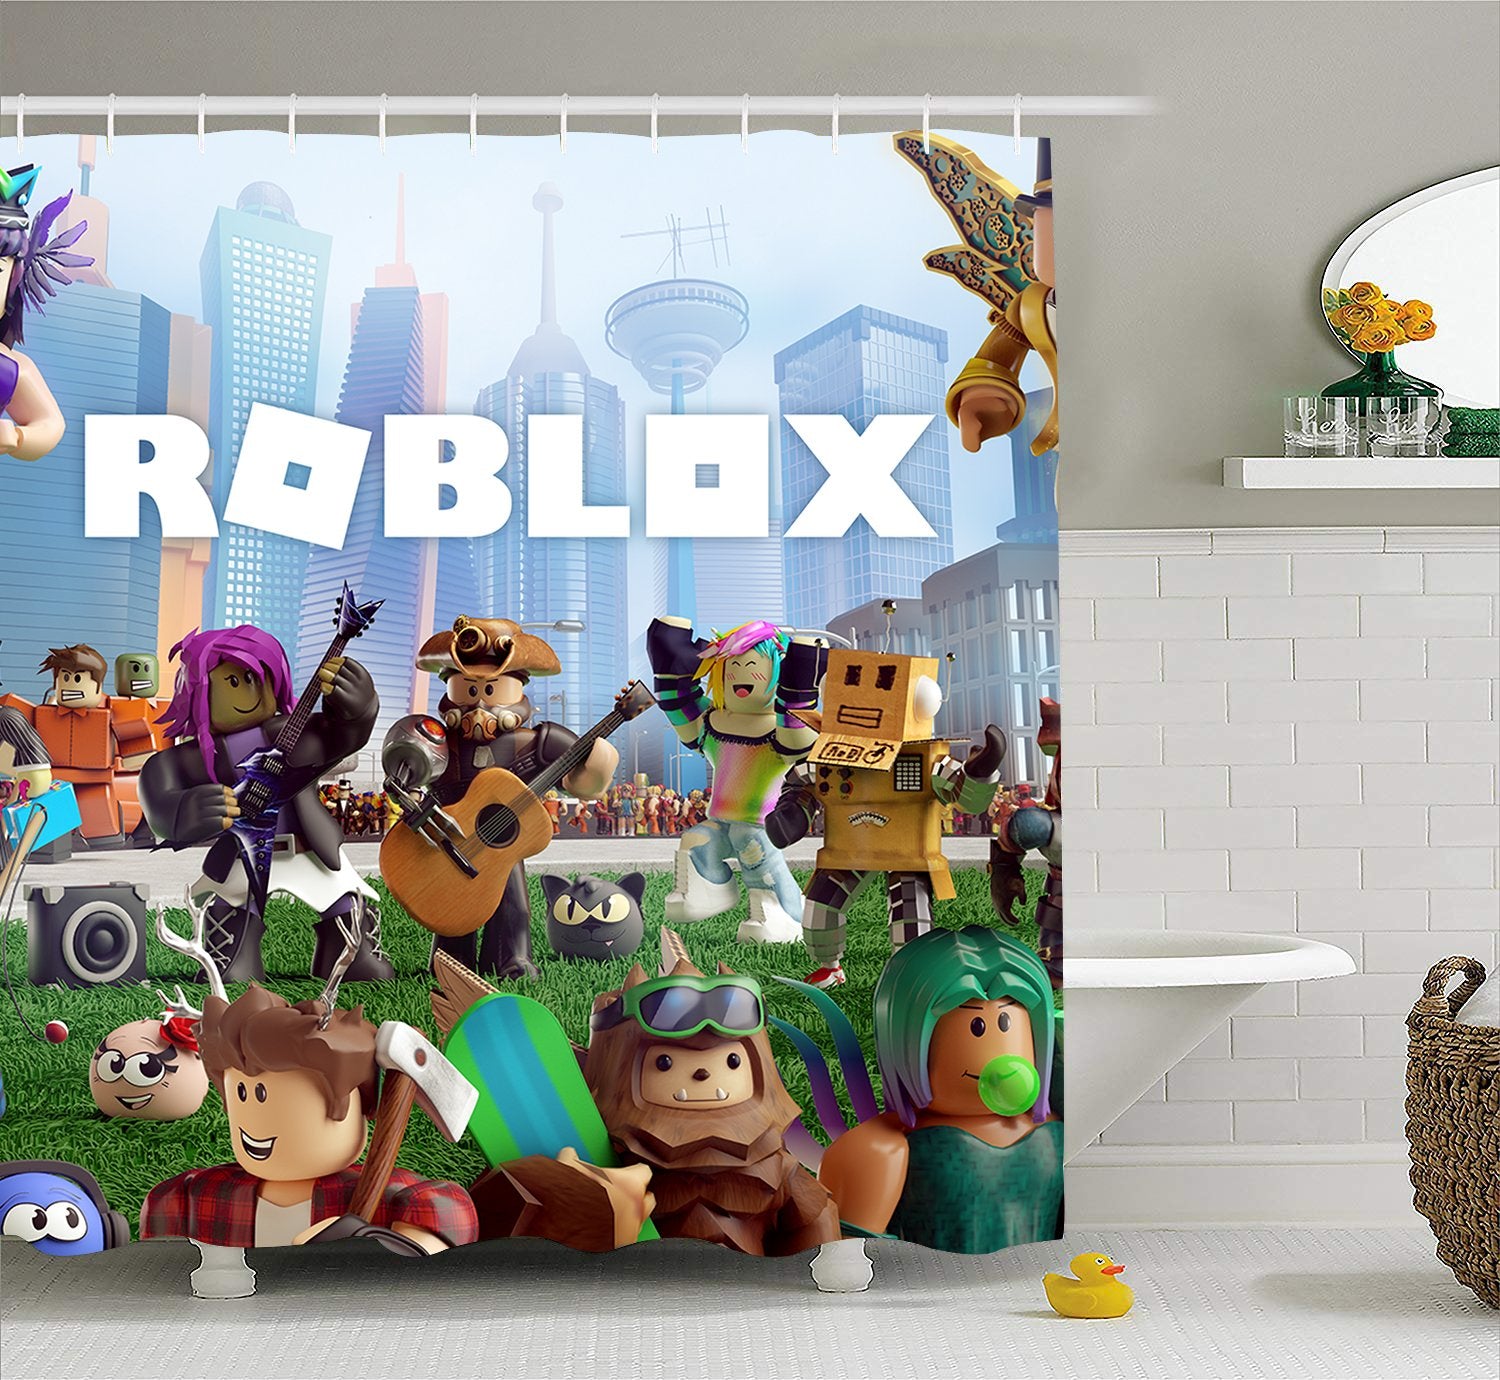 Roblox Shower Curtain Extra Long Bath Decorations Bathroom Decor - roblox page 5 prosholiday